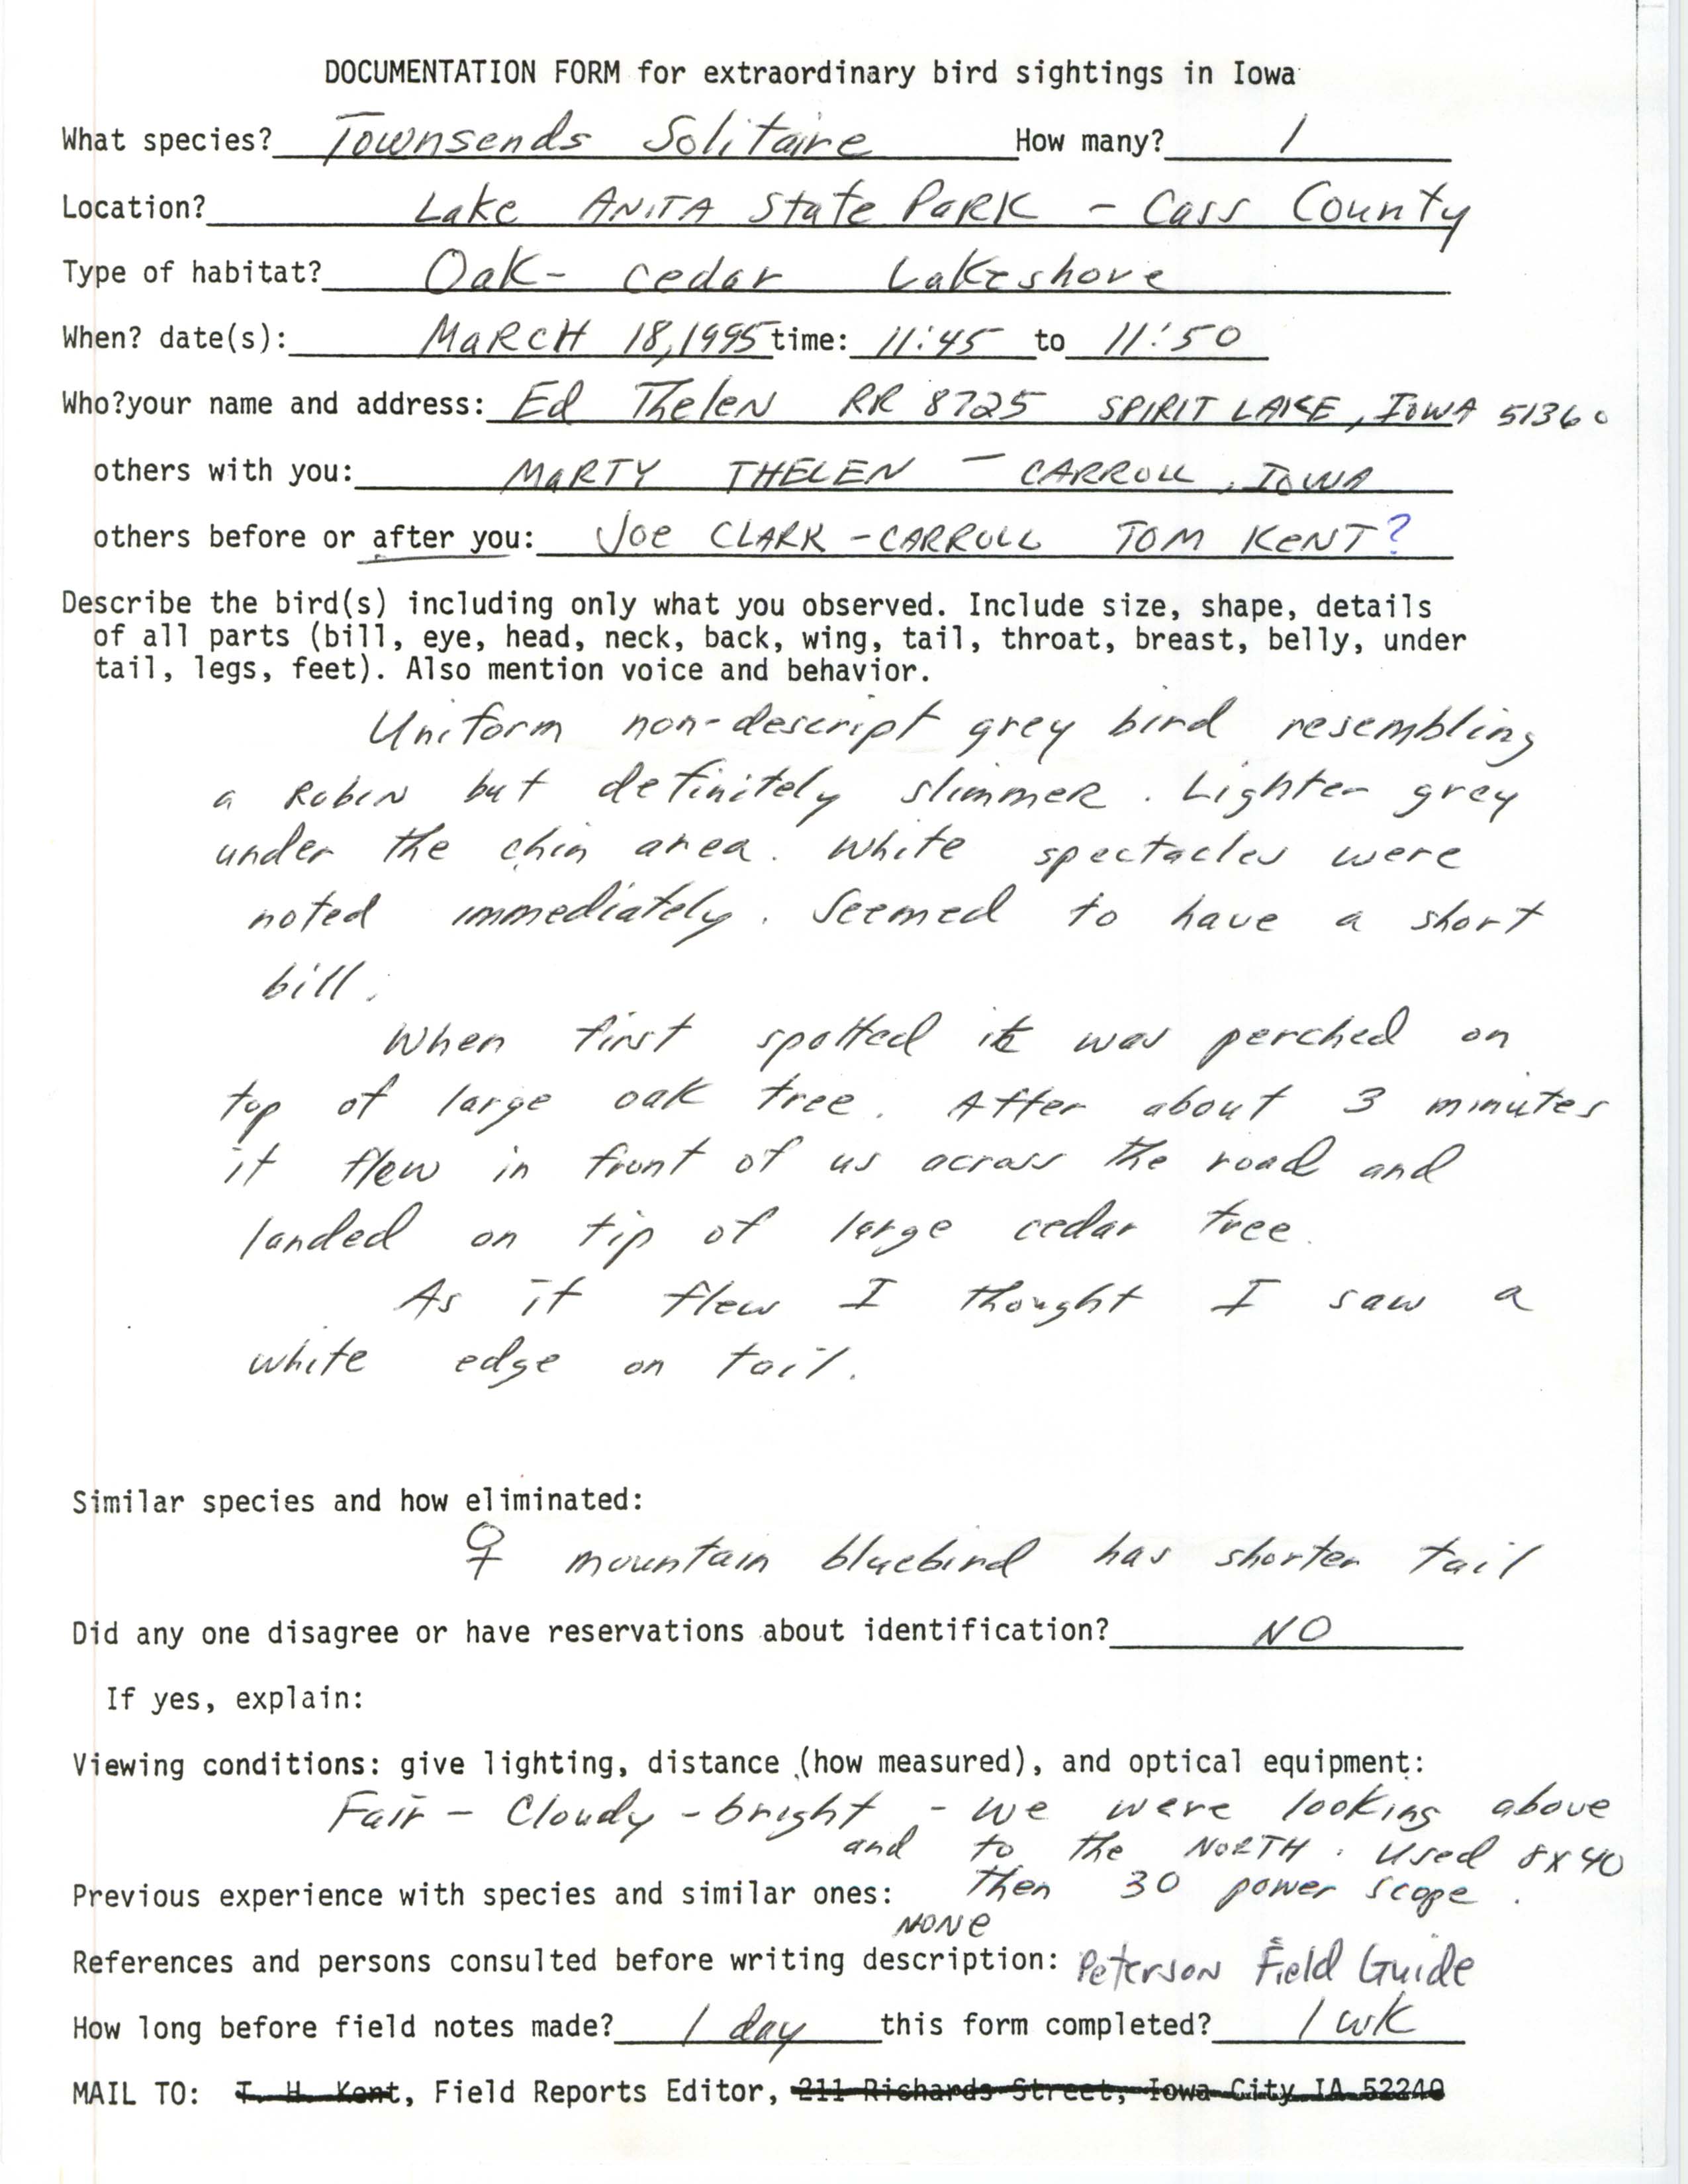 Rare bird documentation form for Townsend's Solitaire at Lake Anita State Park, 1995